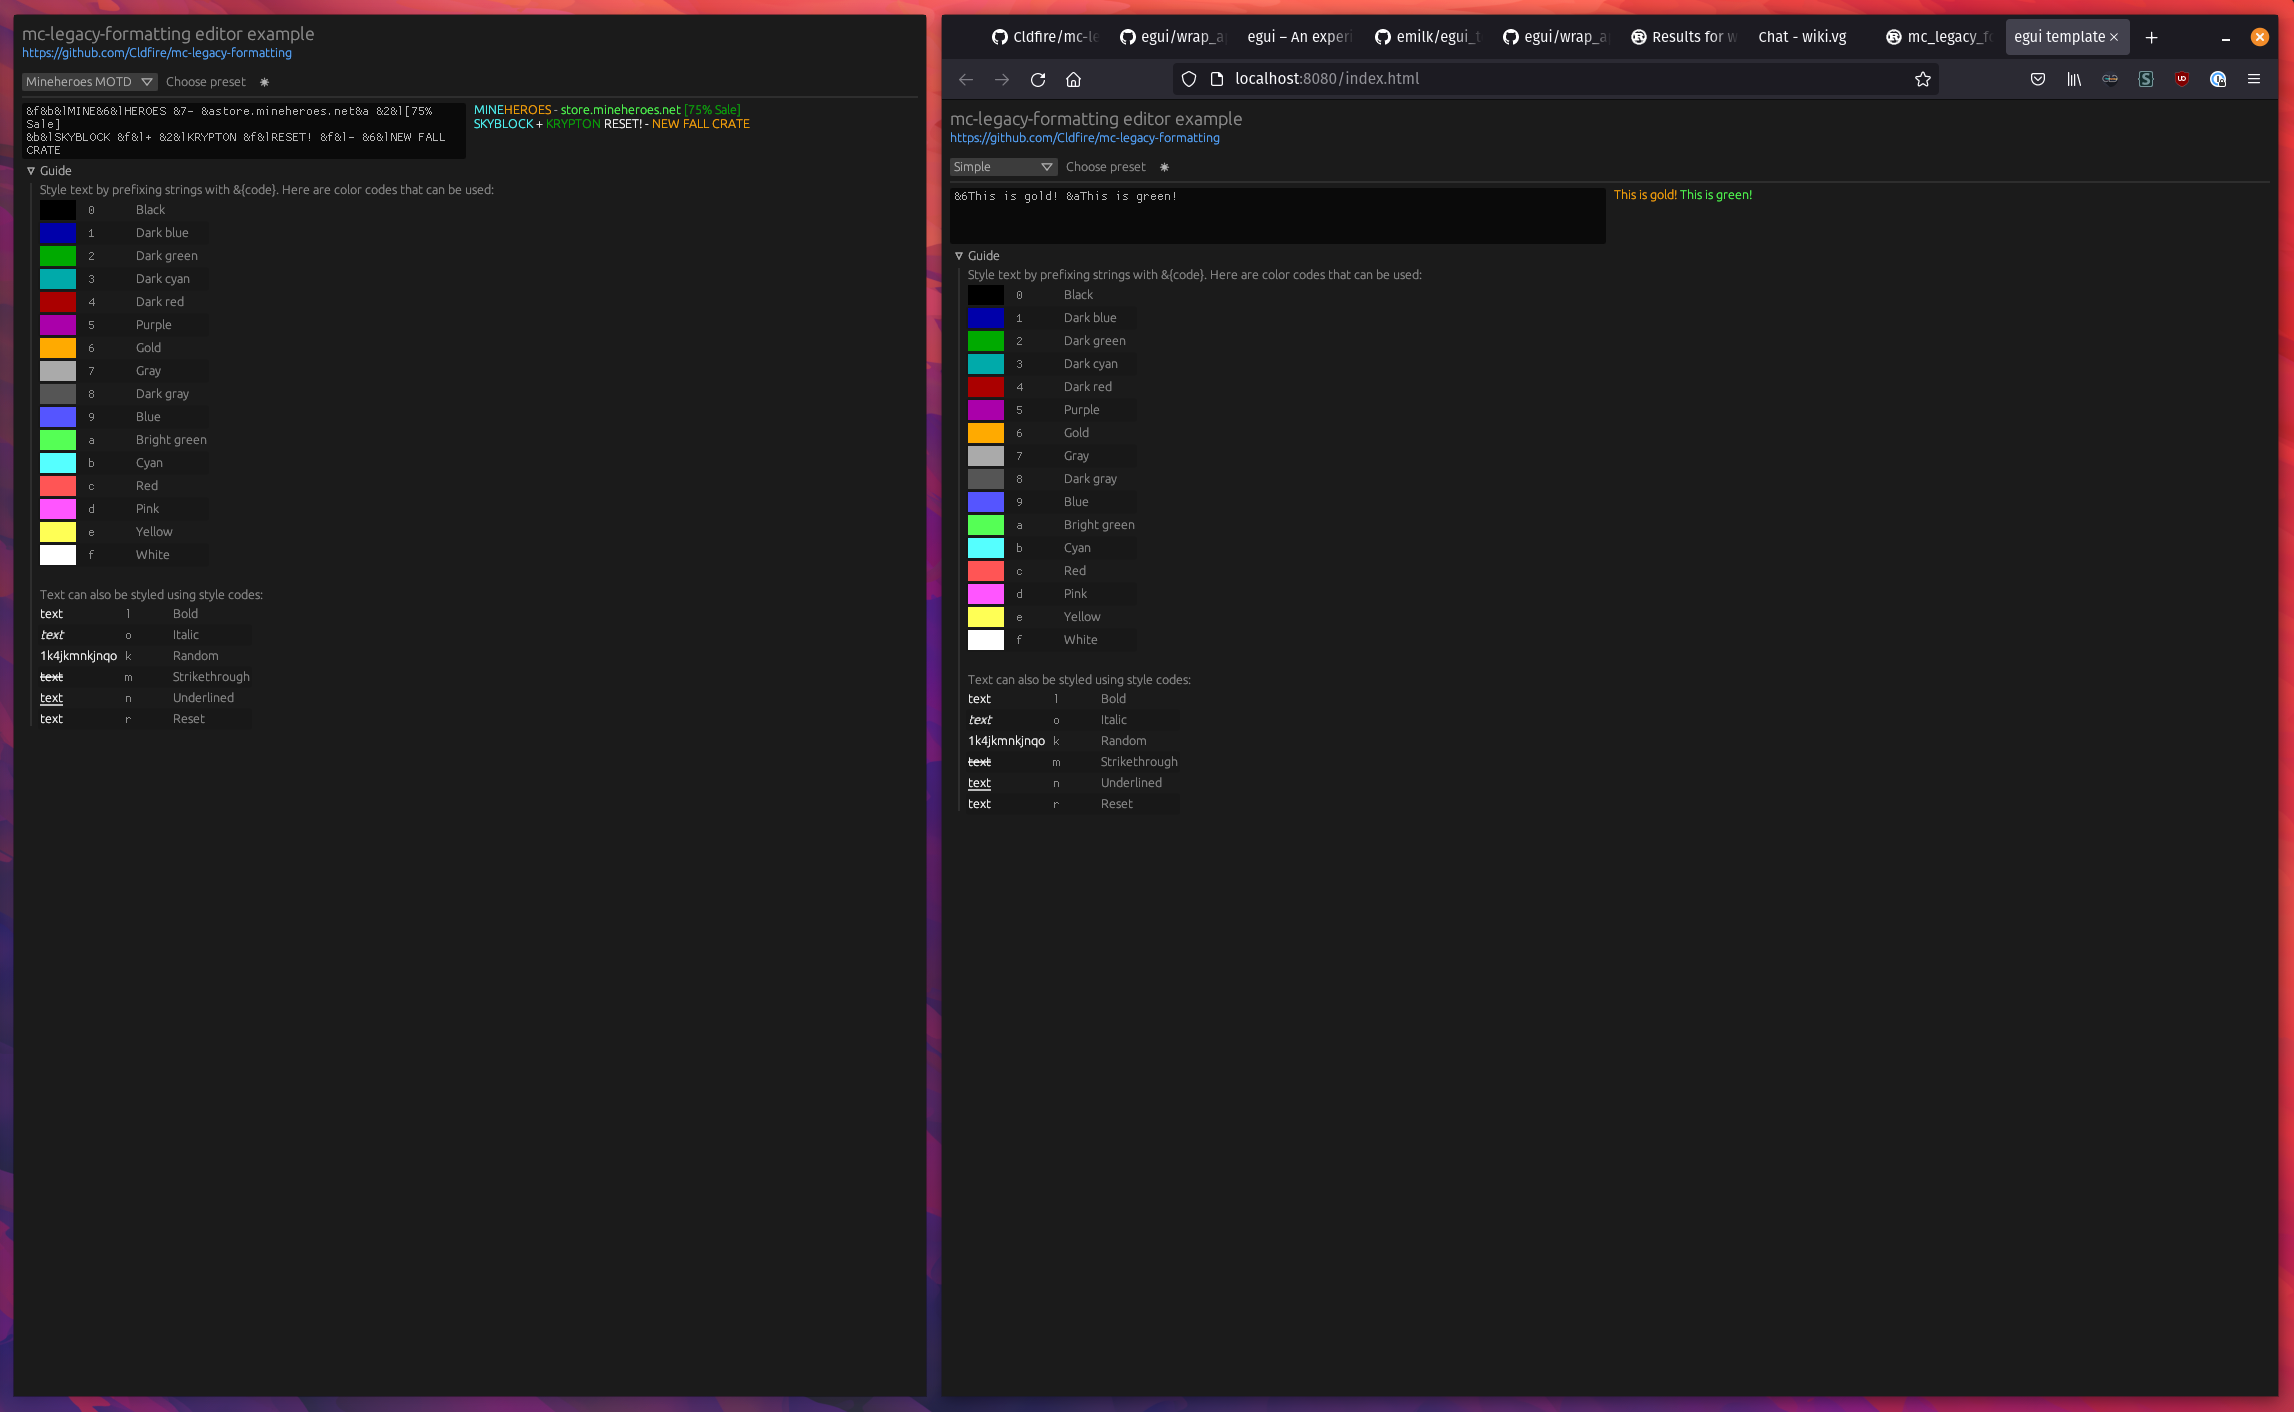 screenshot of the editor-gui running natively and in a web browser side-by-side